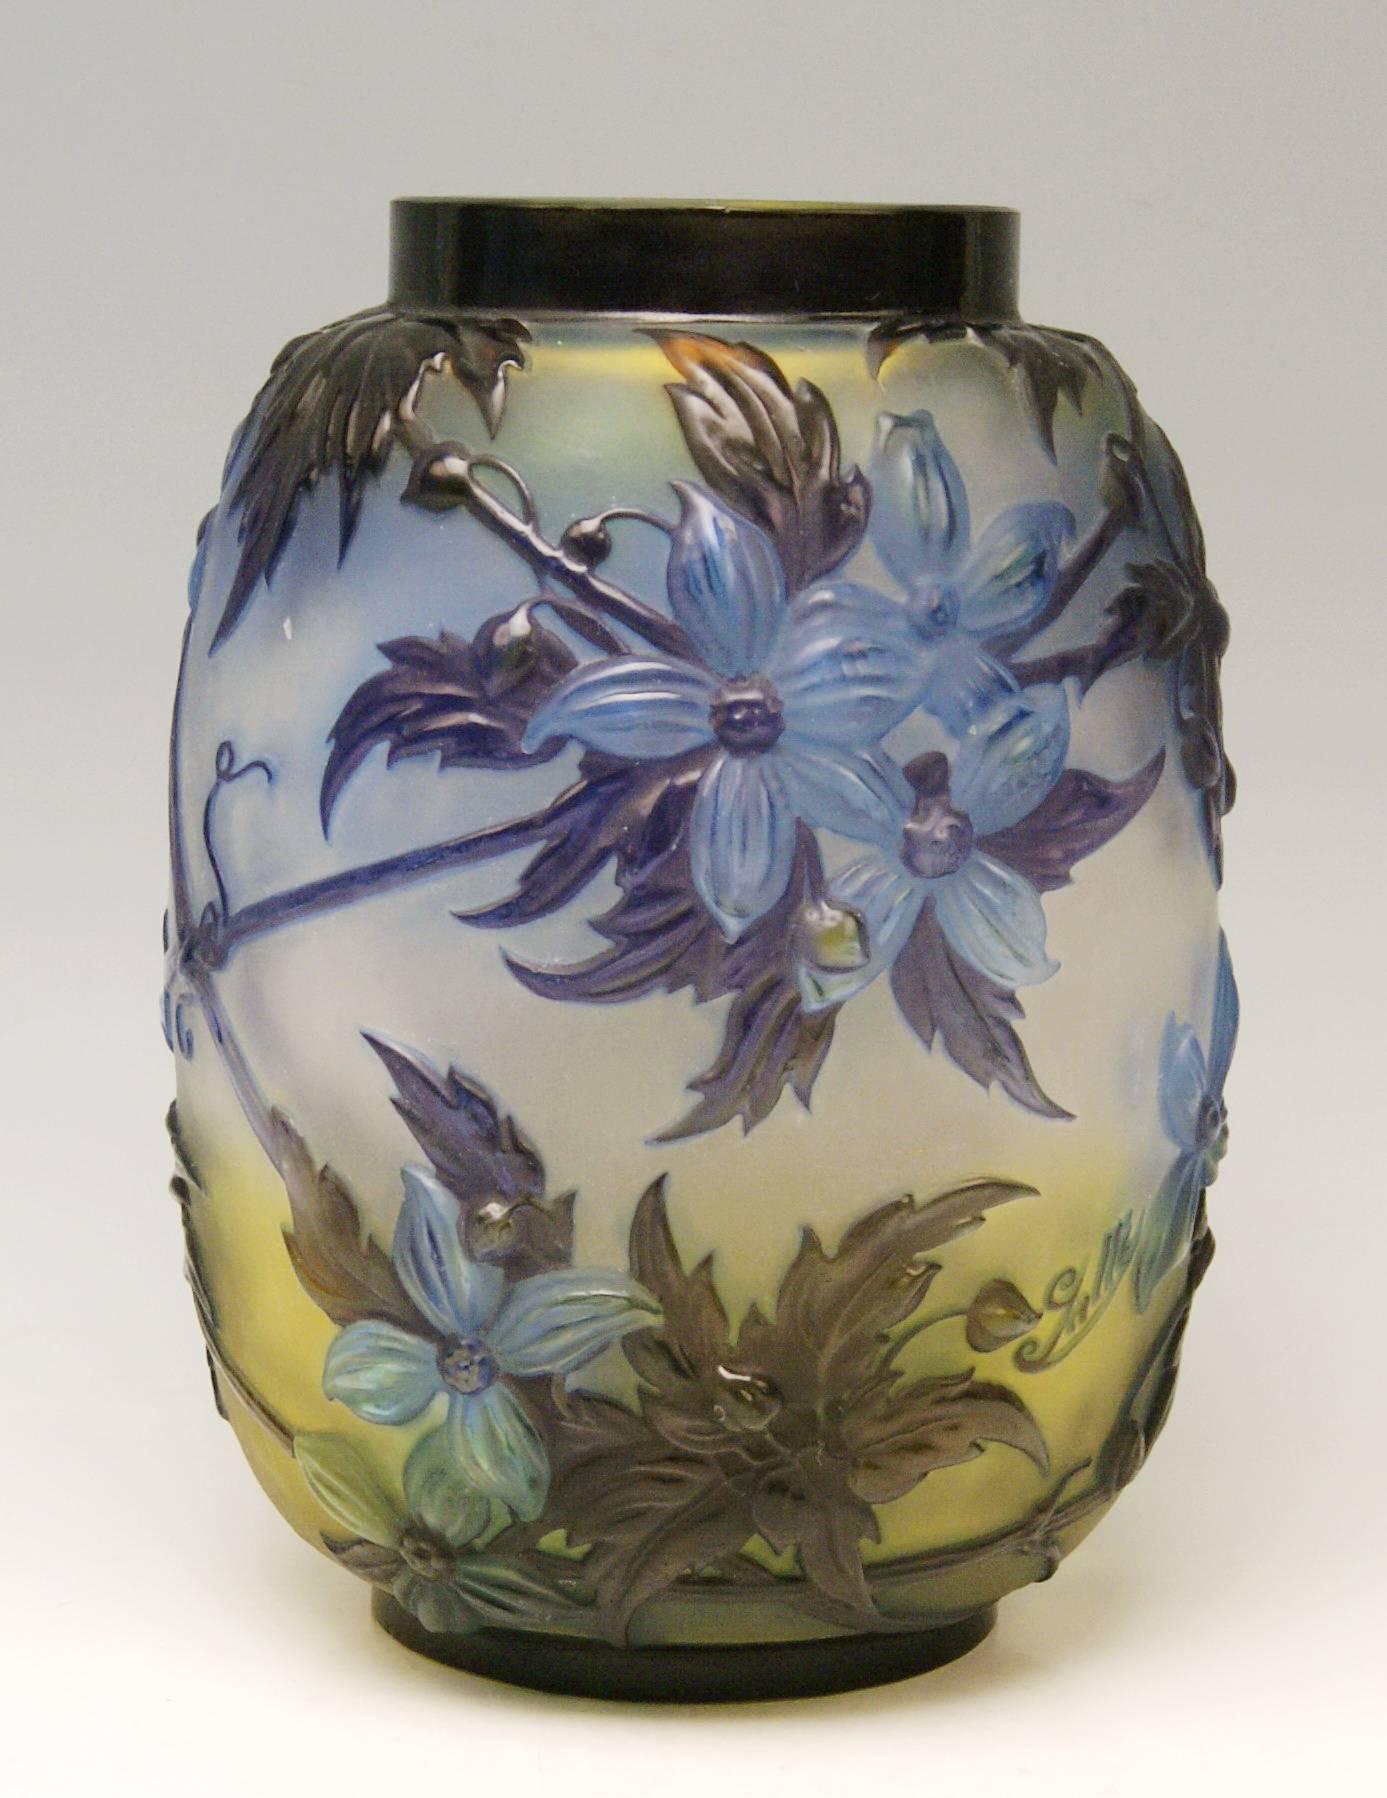 Gallé Nancy Art Nouveau bellied Soufflé Vase
made in France (Nancy, Lorraine) / circa 1925 

Specifications:
Stunningly manufactured casing glass (yellowish-opalescent underneath / bright blue & dark violet shaded at outer wall). - It is a bellied